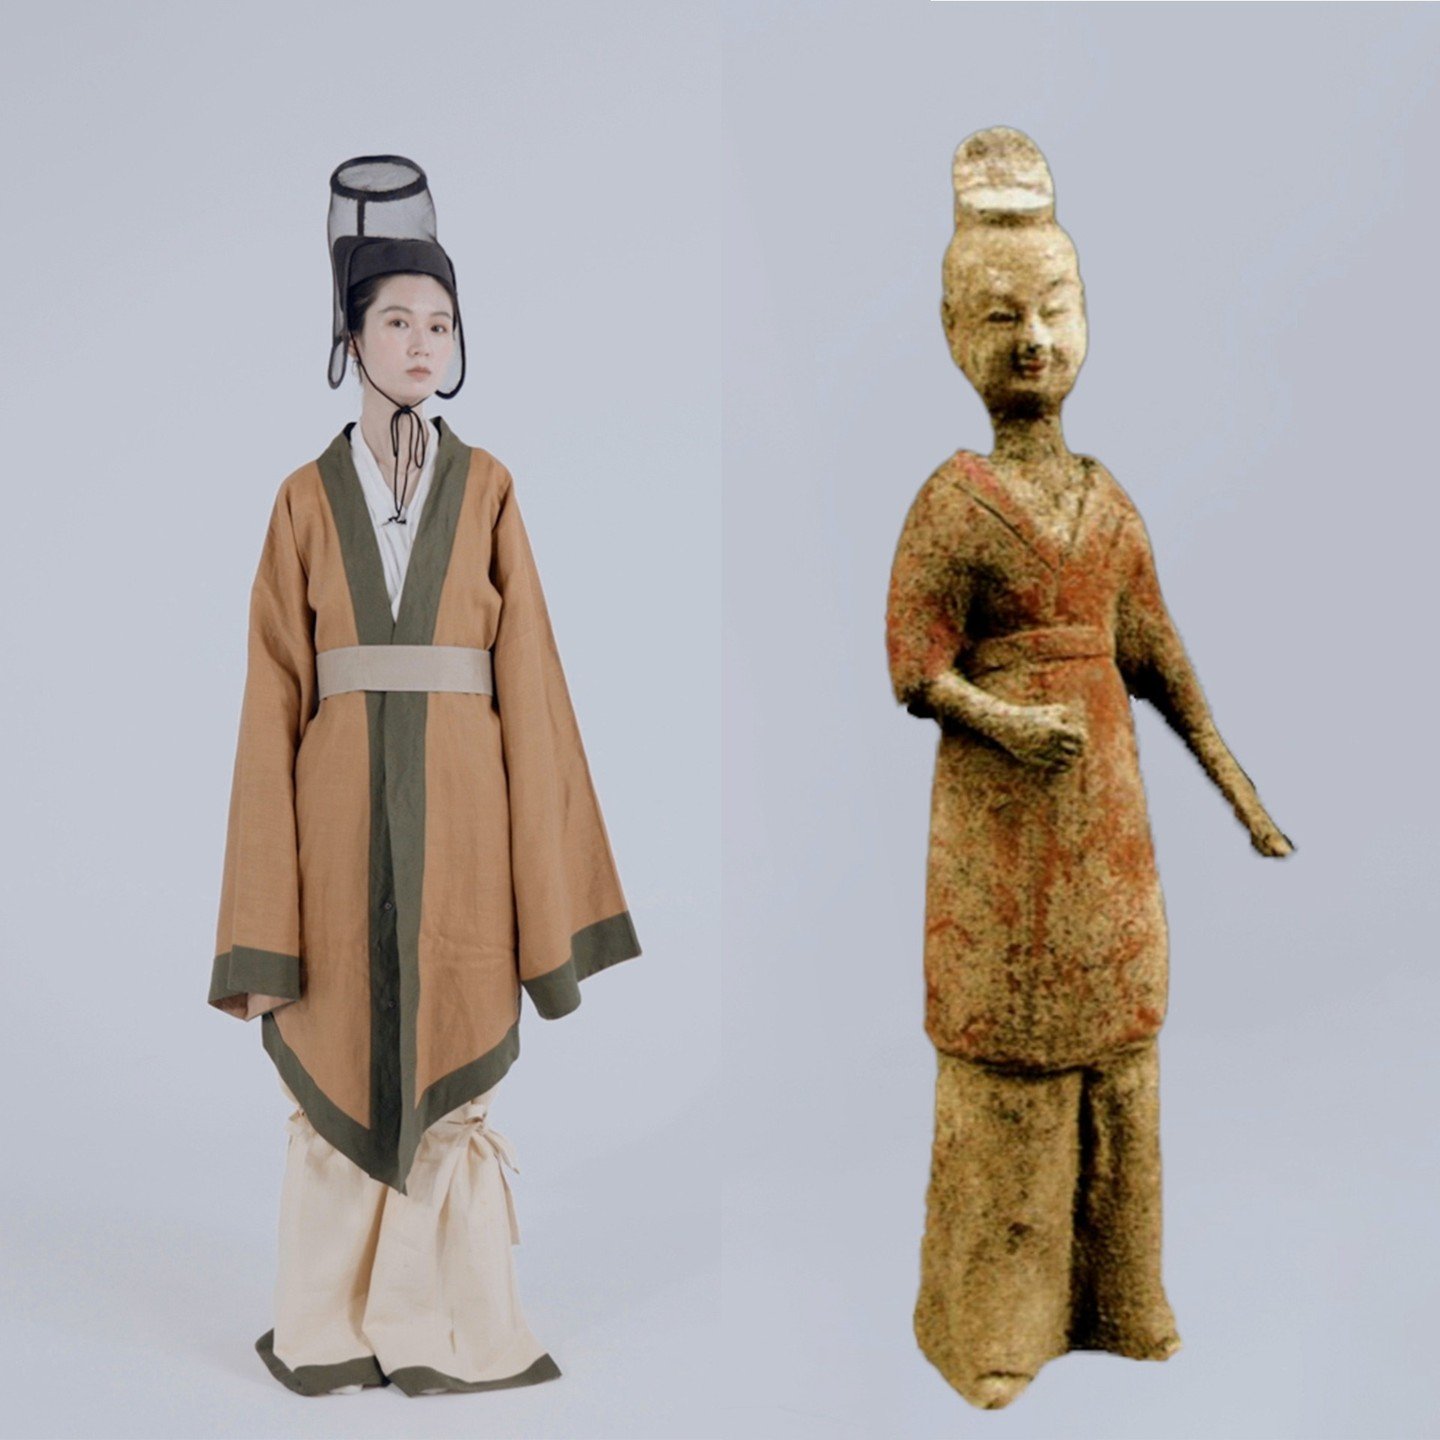 [Hats and Gender in Ancient China] 魏晉南北朝帽子與女扮男裝

In the second episode of our Chinese Clothing Through the Ages video (out now, see link in bio!!), we explore how clothing acts as a demarcator of gender. In the Six Dynasties period, there was a break